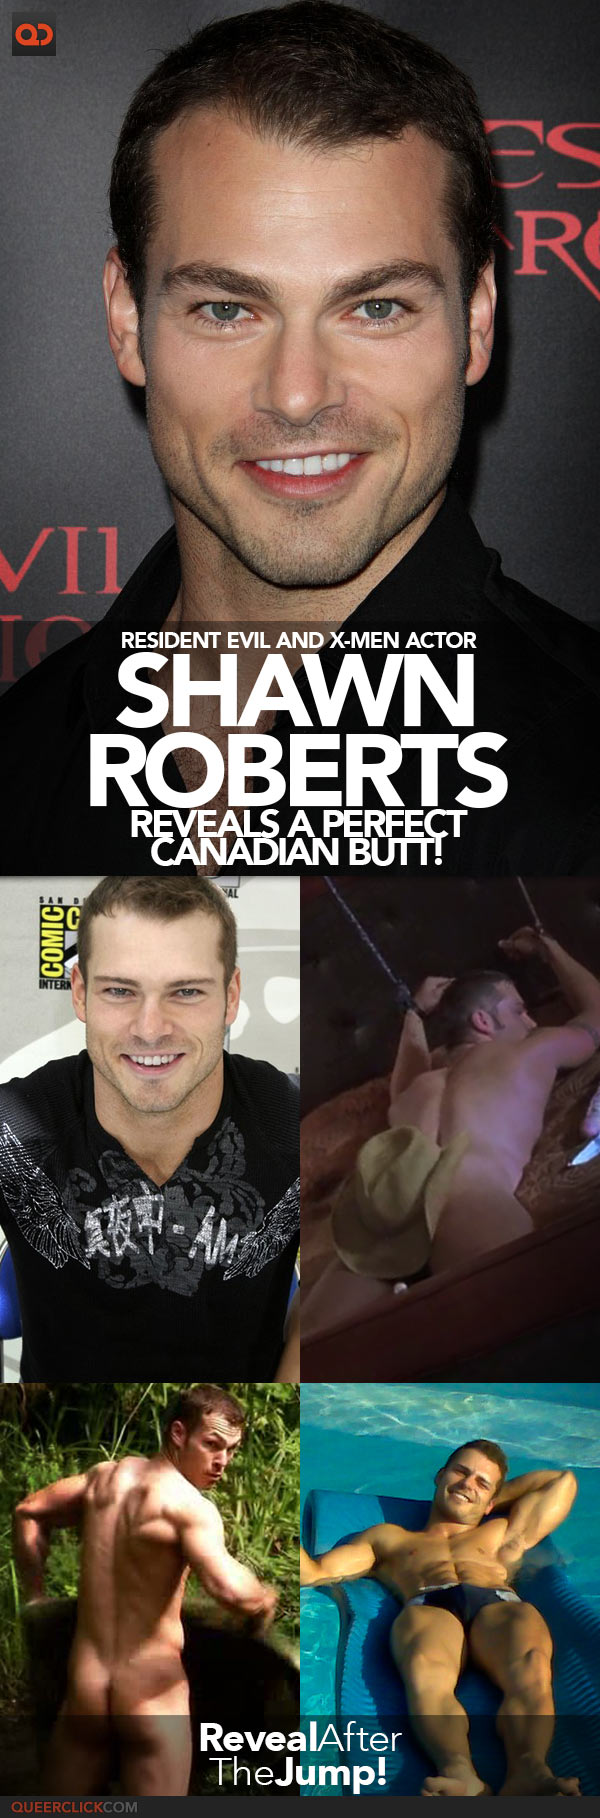 qc-exposed-celebs-shawn_roberts_resident_evil_and_xmen_actor_naked-teaser